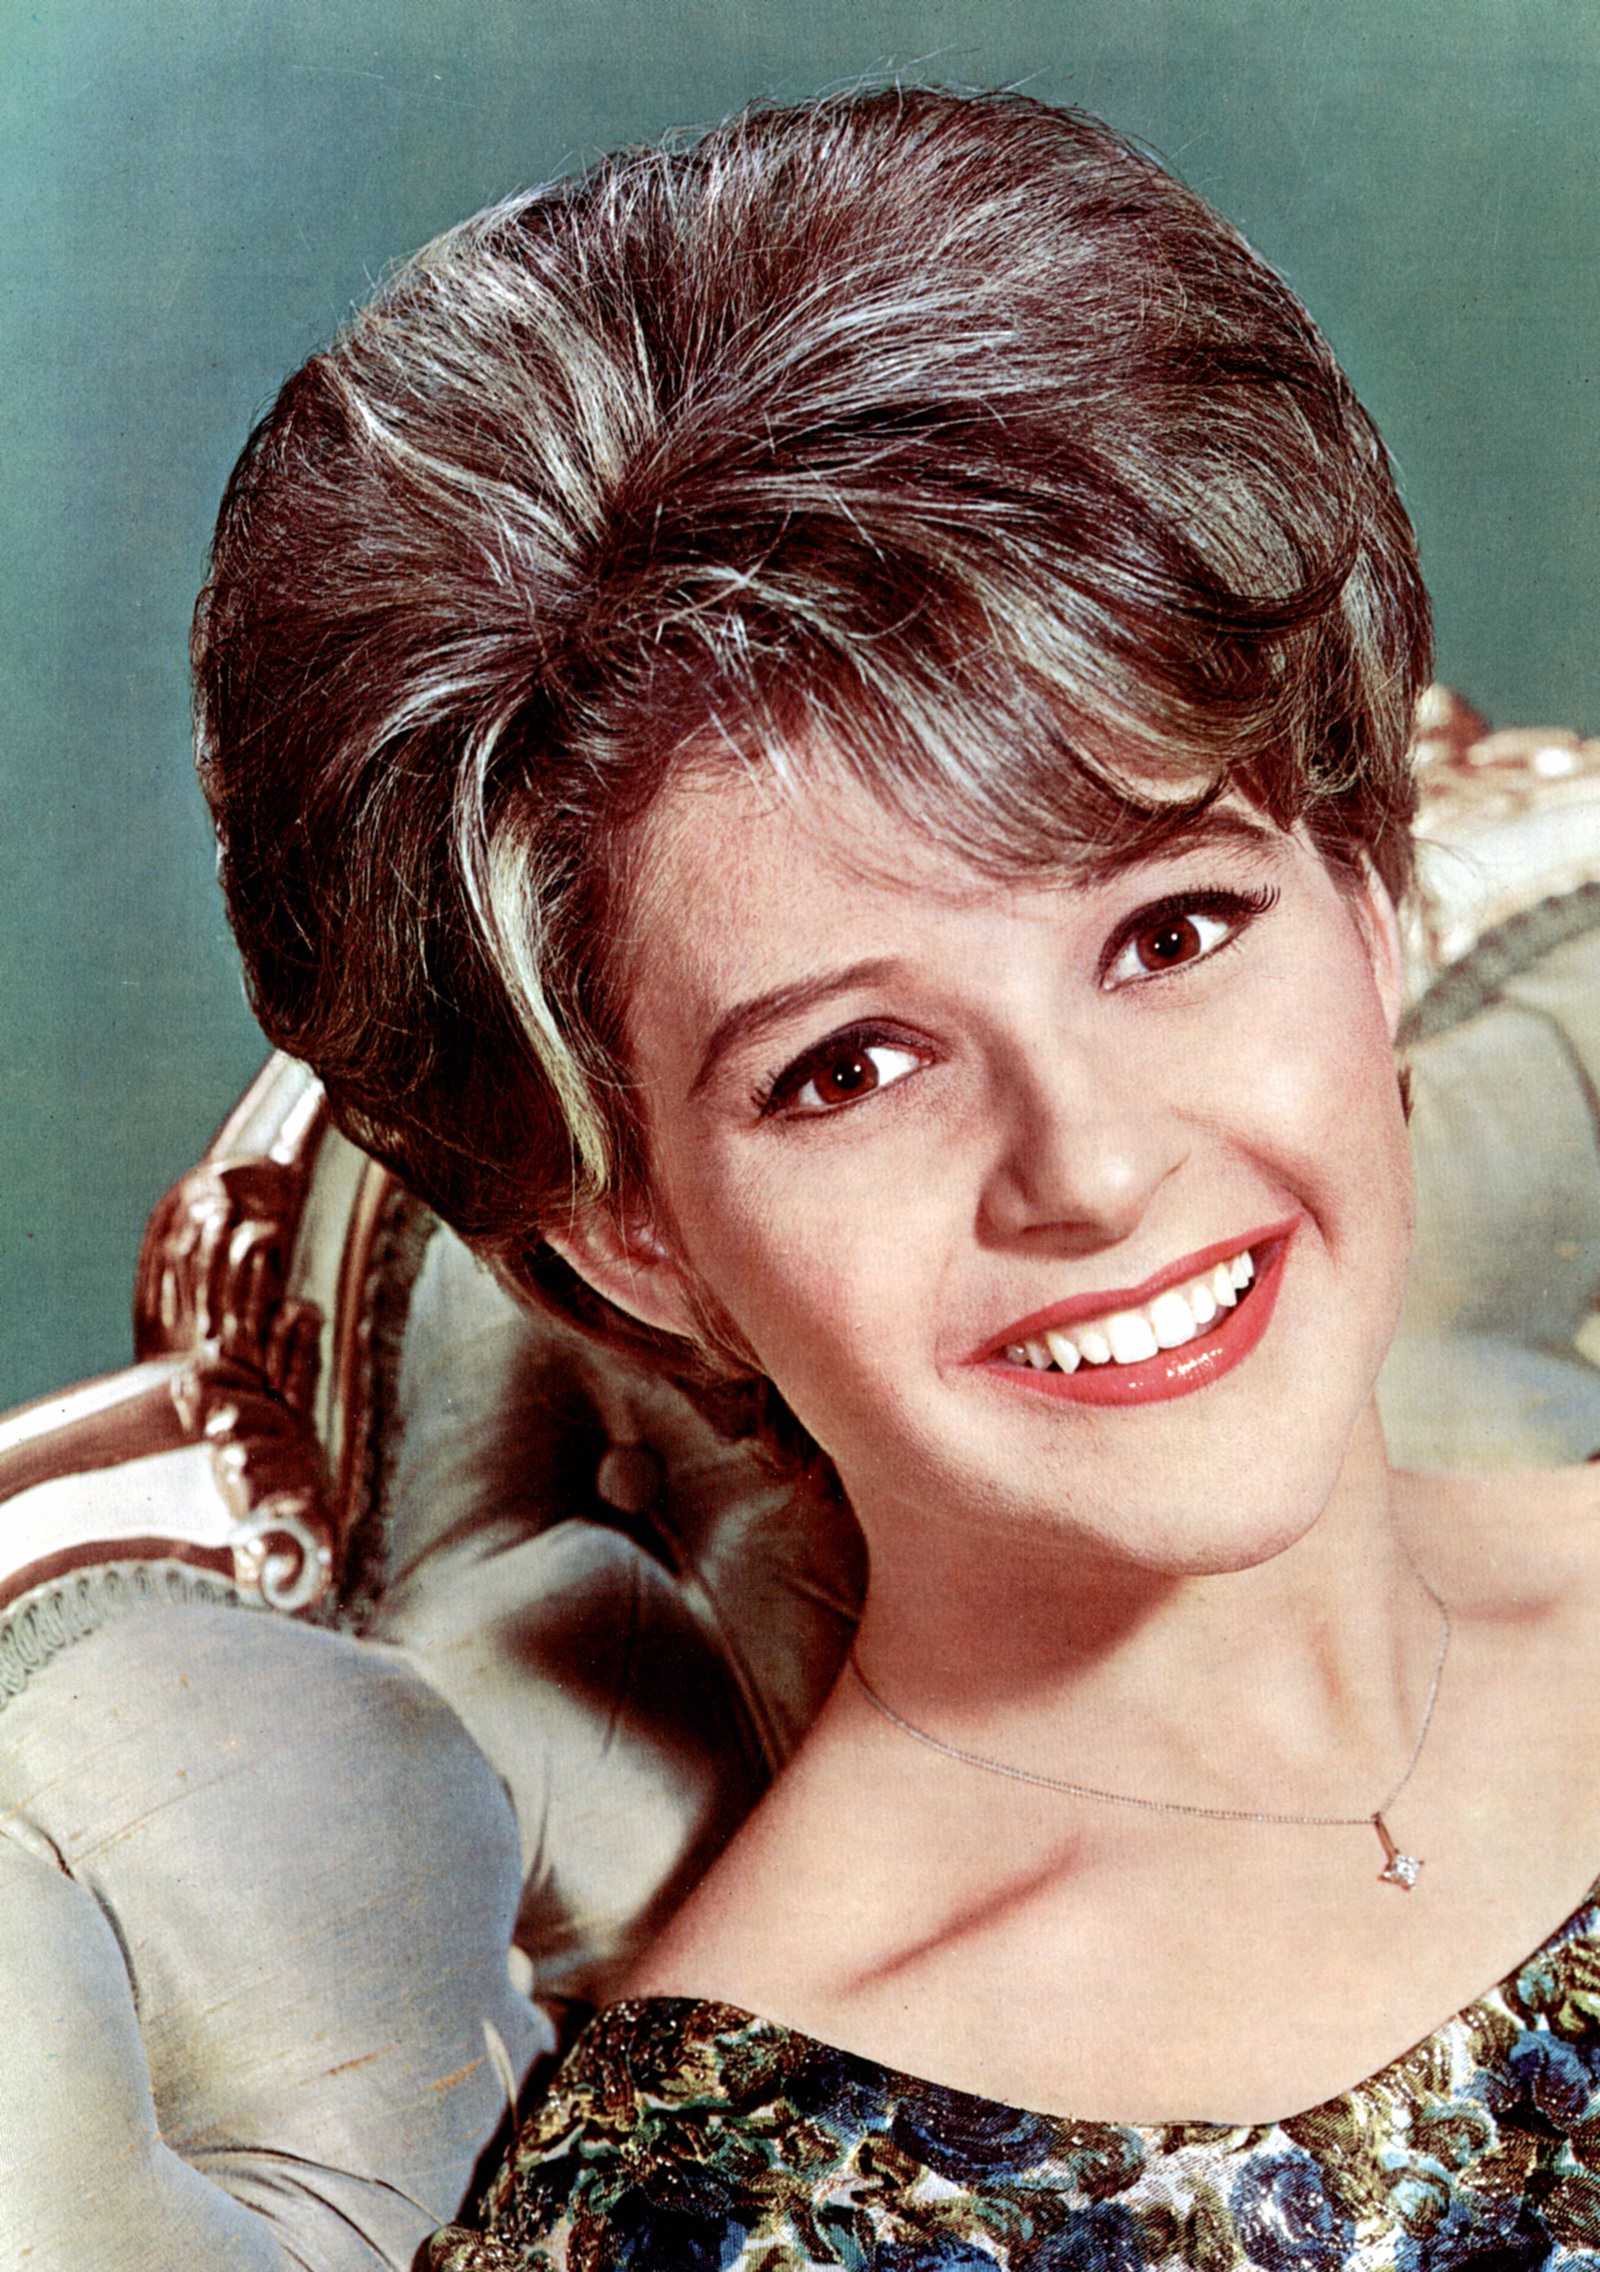 Brenda Lee photographed in 1950 | Source: Getty Images